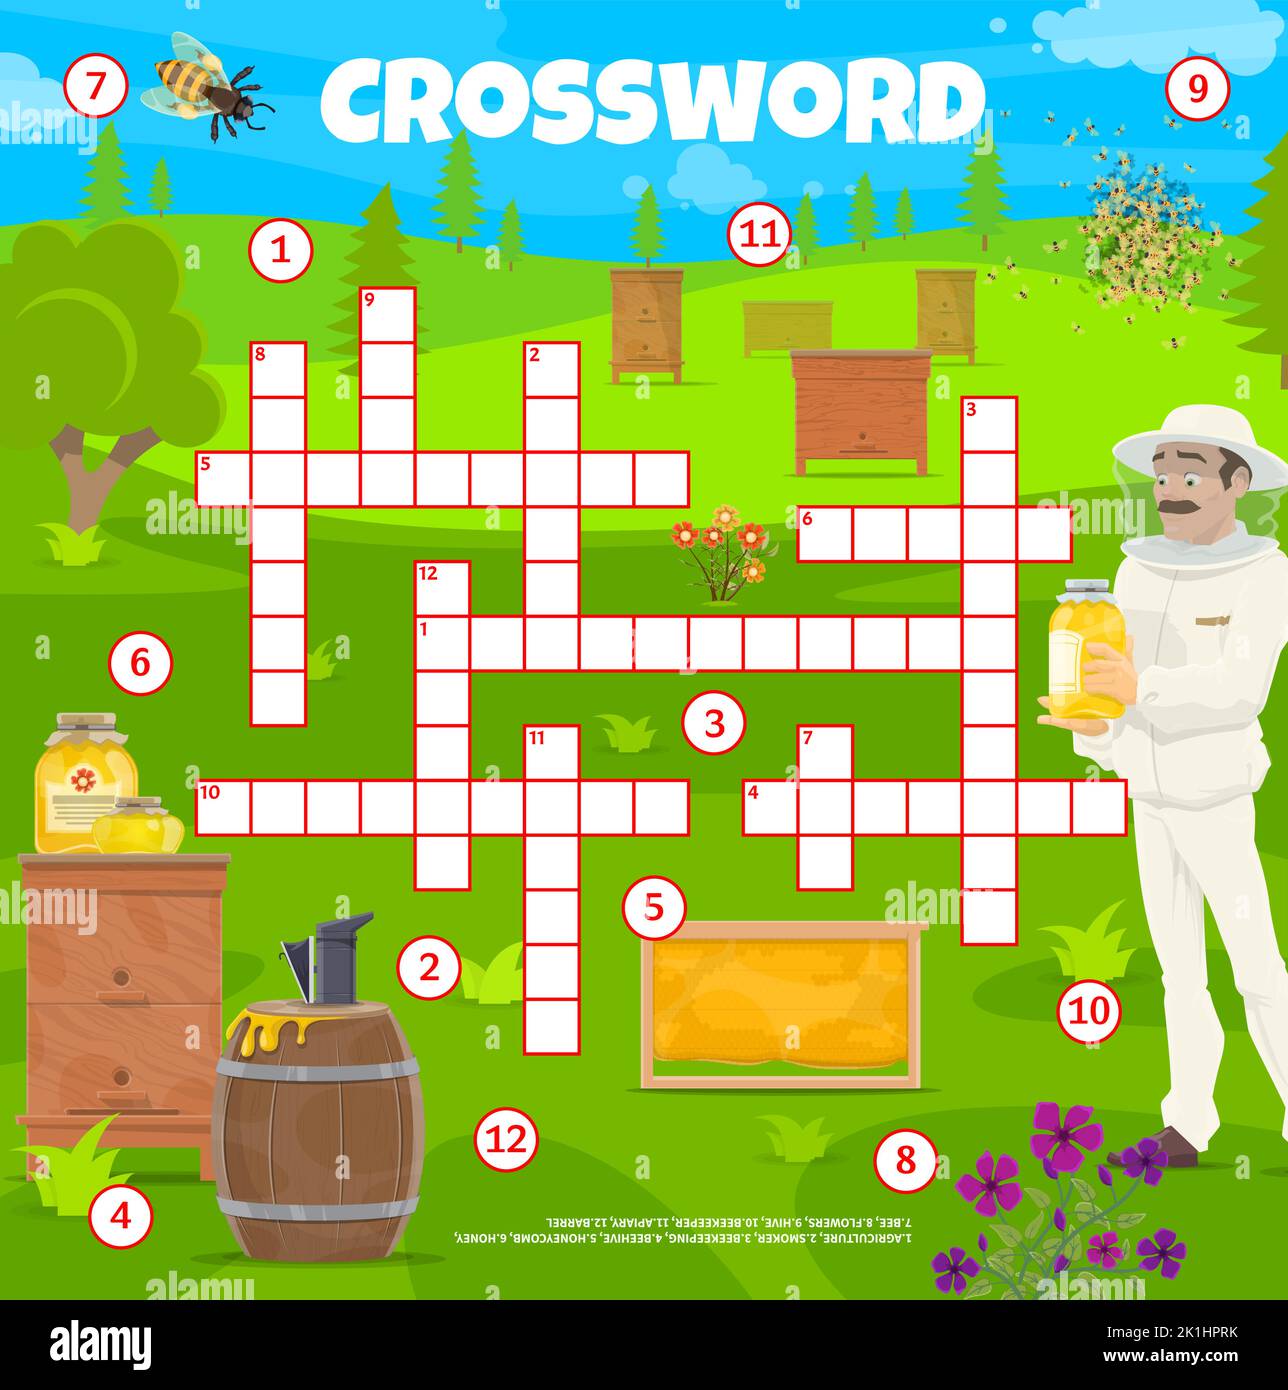 Beekeeping and apiary crossword puzzle game grid and agriculture quiz, vector worksheet. Kids education crossword riddle with honey beekeeper and bees smoker, beehive and beekeeping barrel Stock Vector